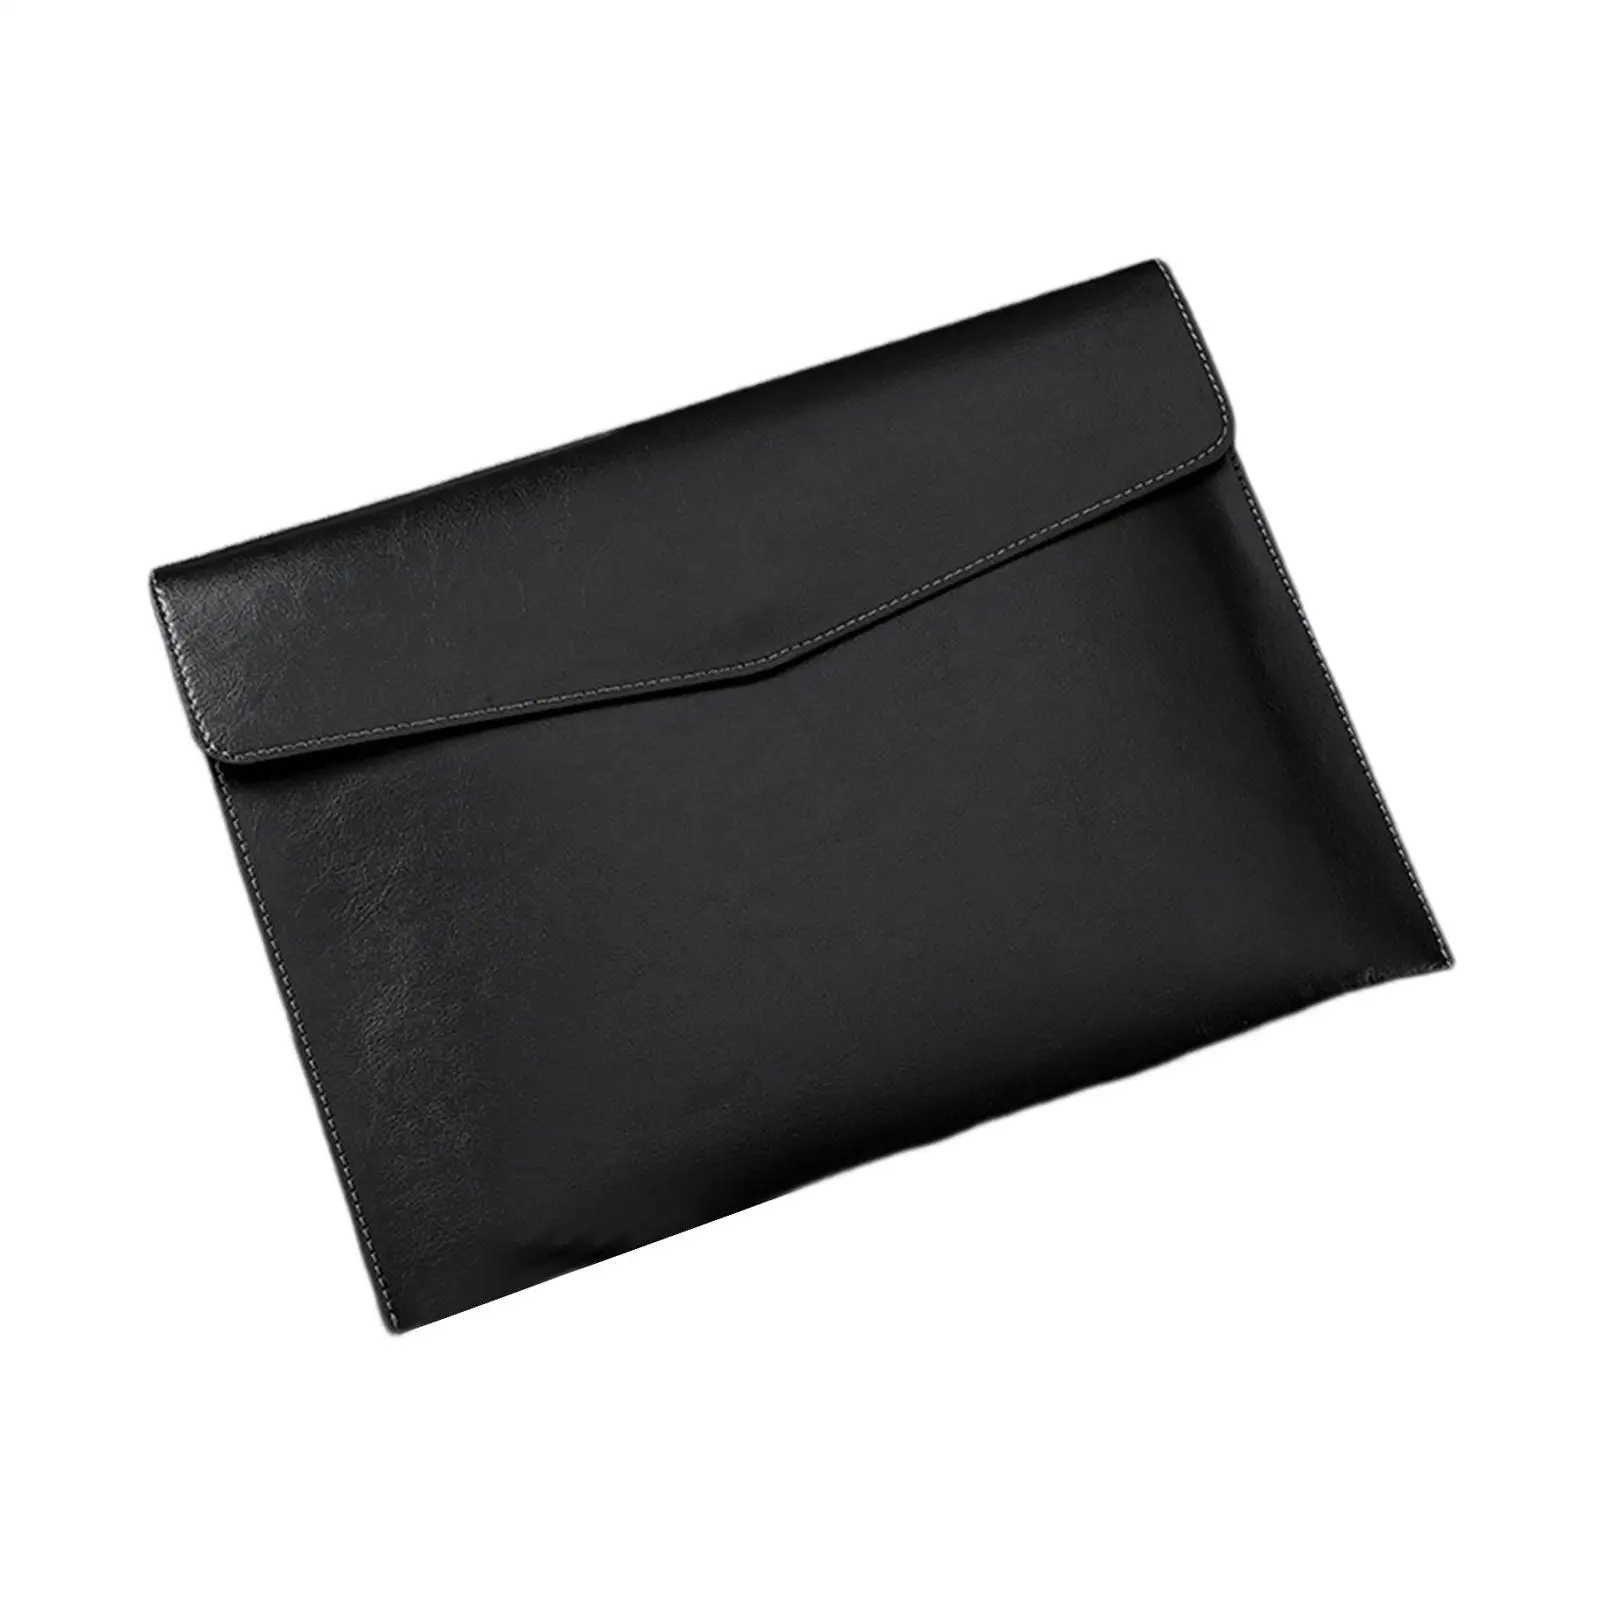 PU Leather Folder Document File Folder Soft Waterproof Portable A4 Business Briefcase for Company Travel Business Family